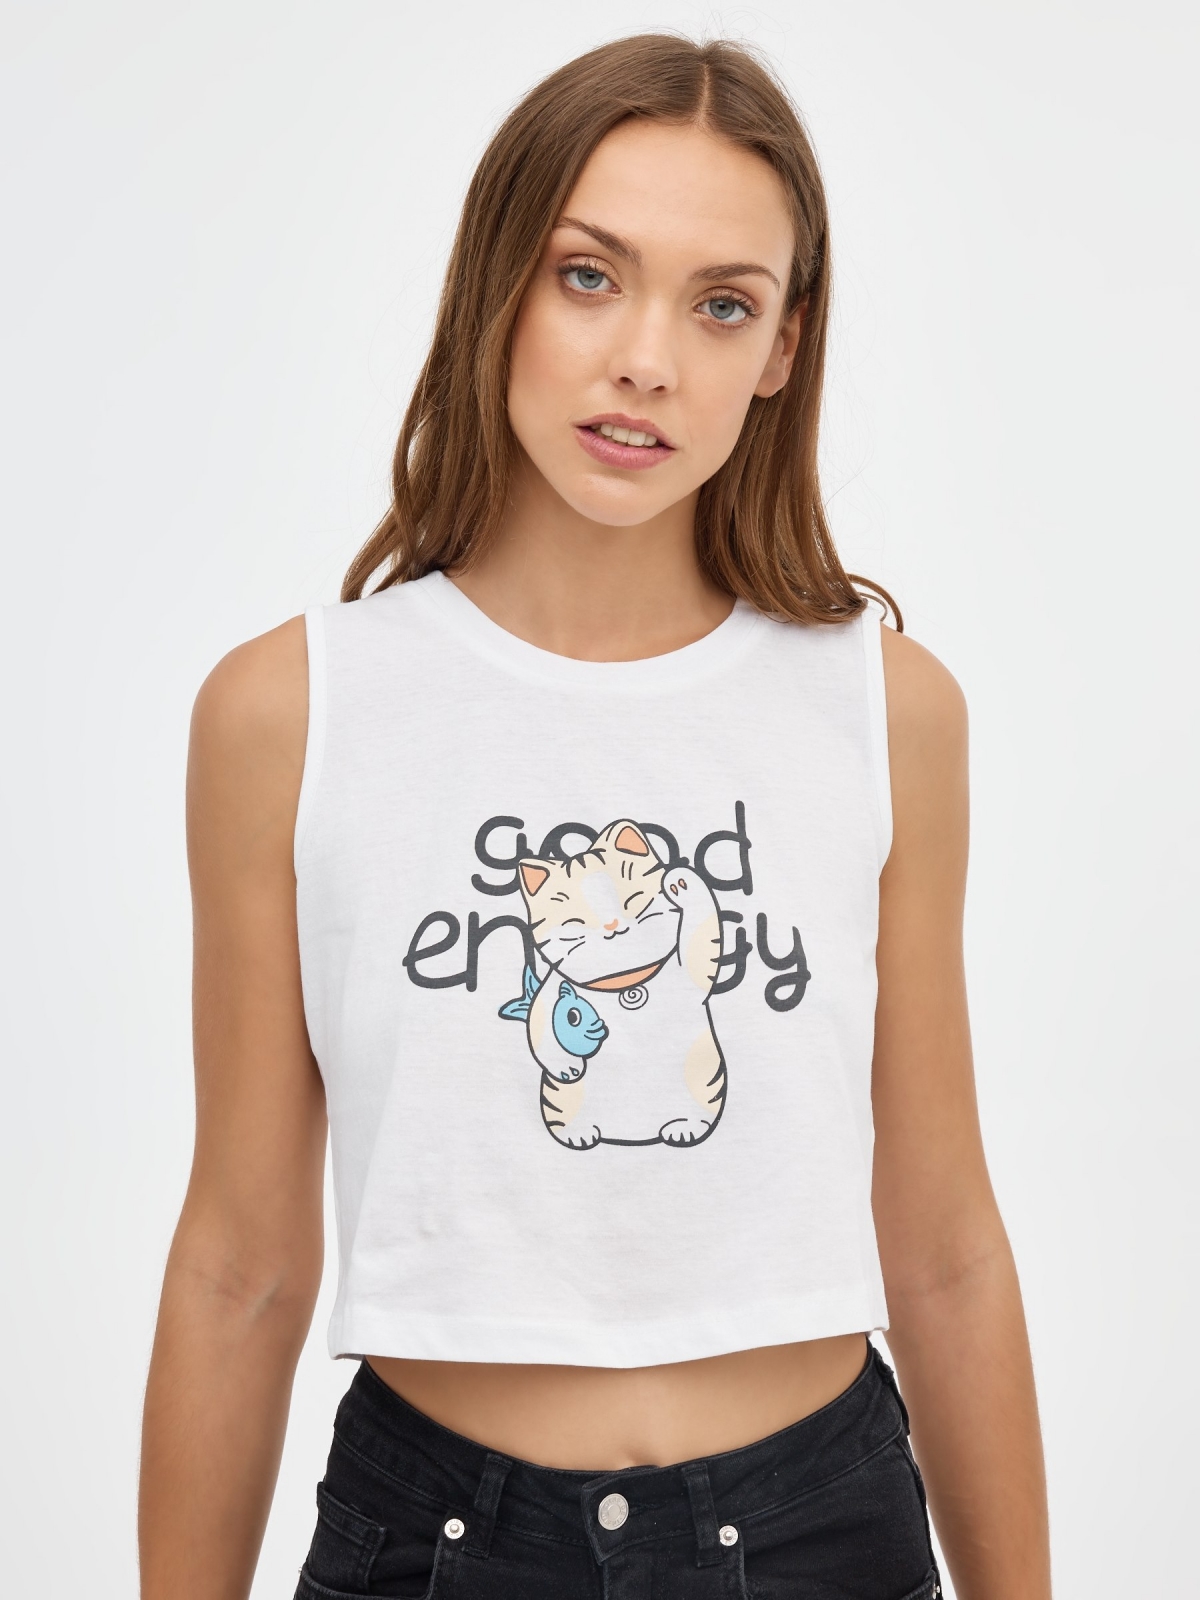 Good Energy T-shirt white middle front view